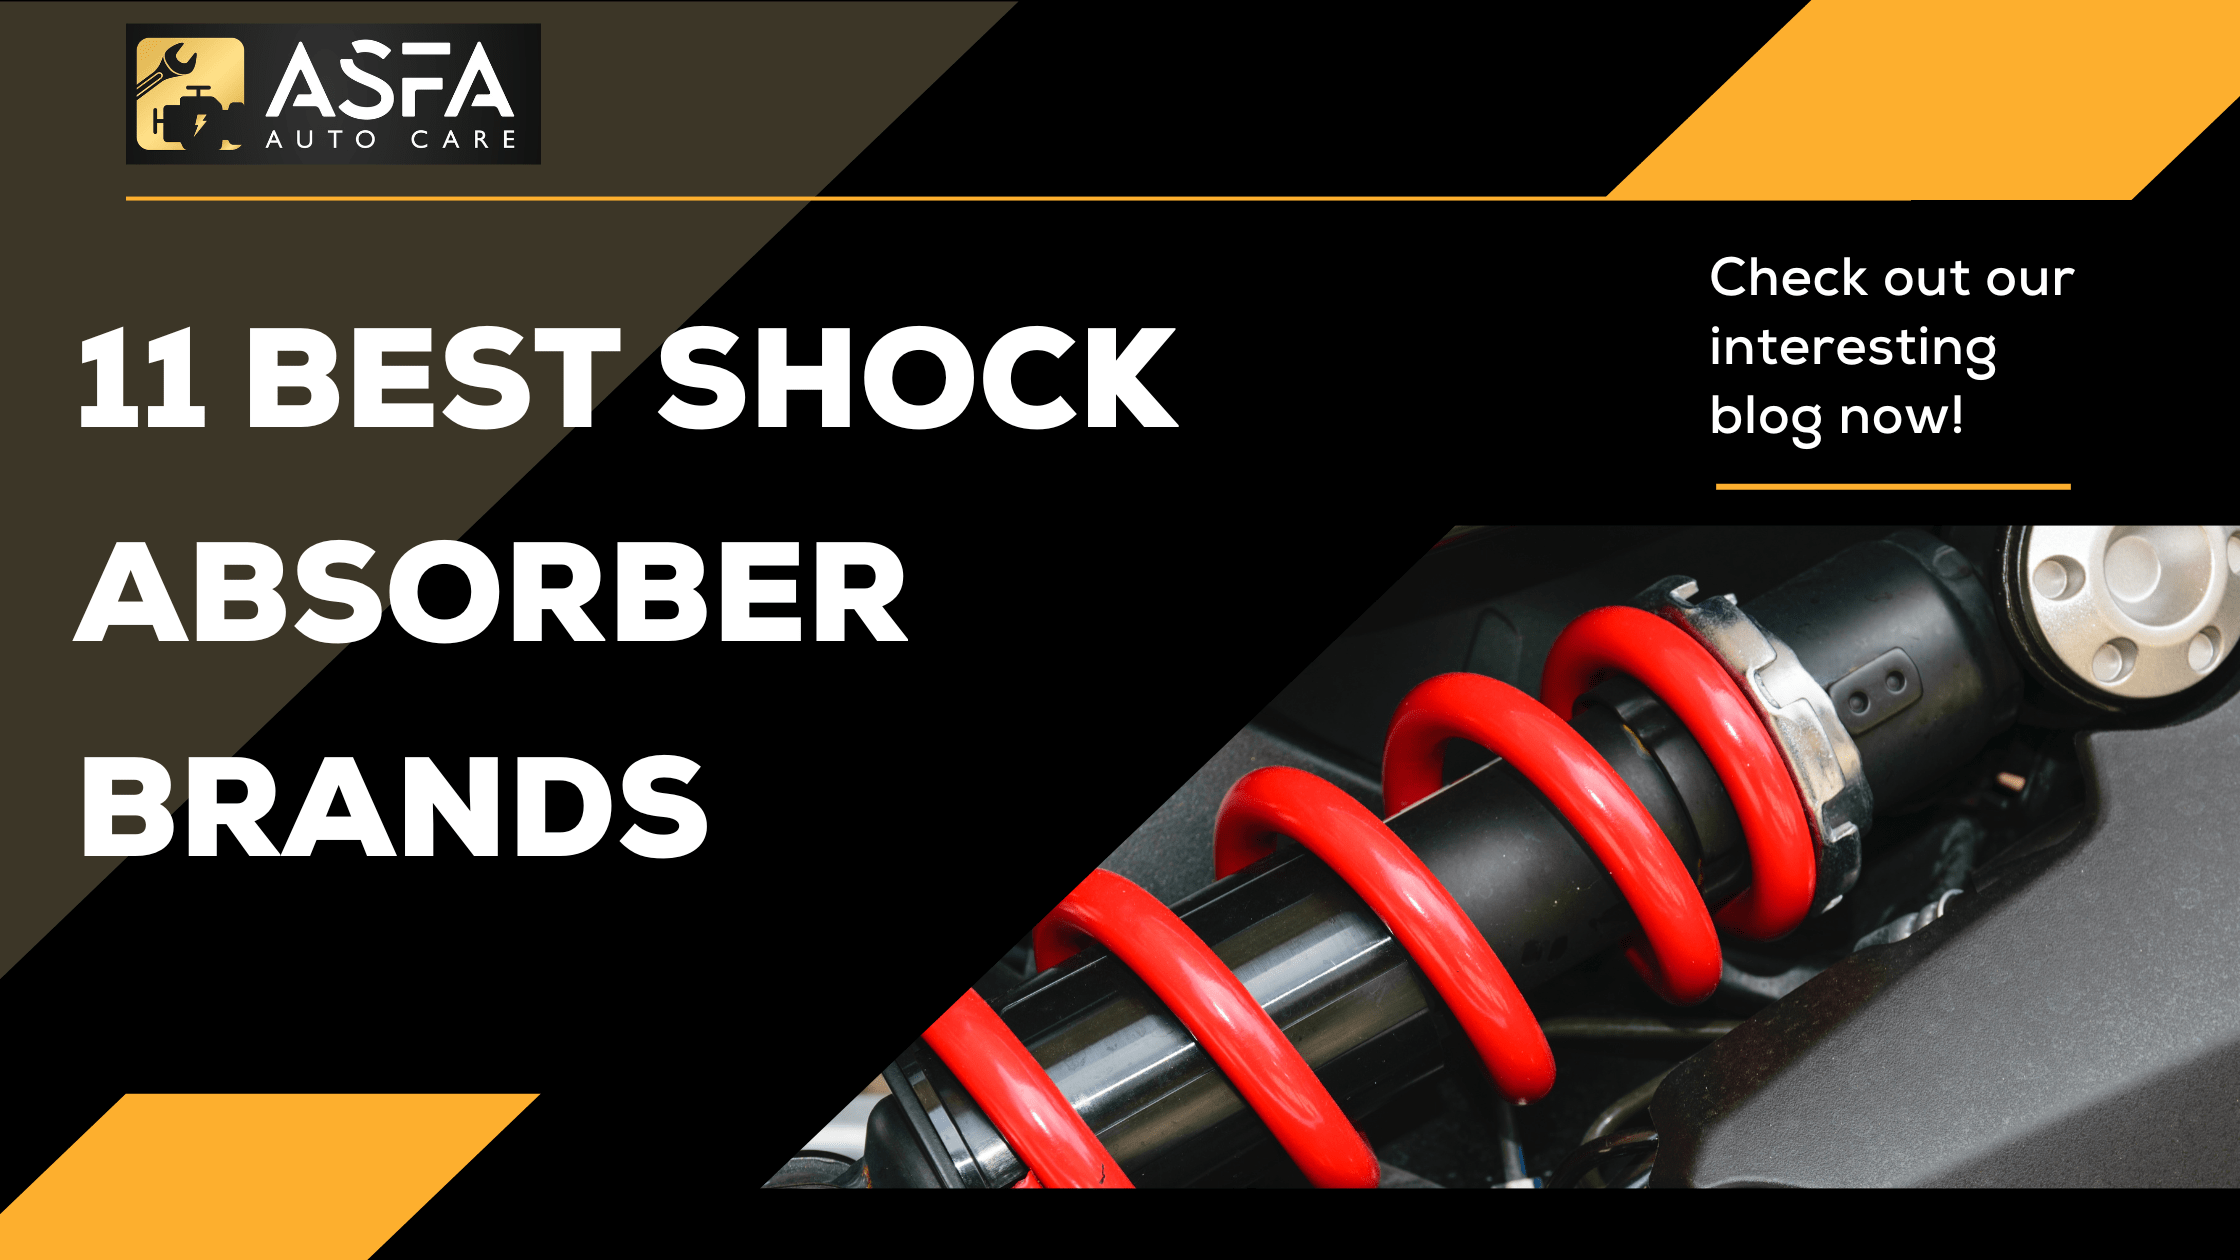 We are Shock Absorber